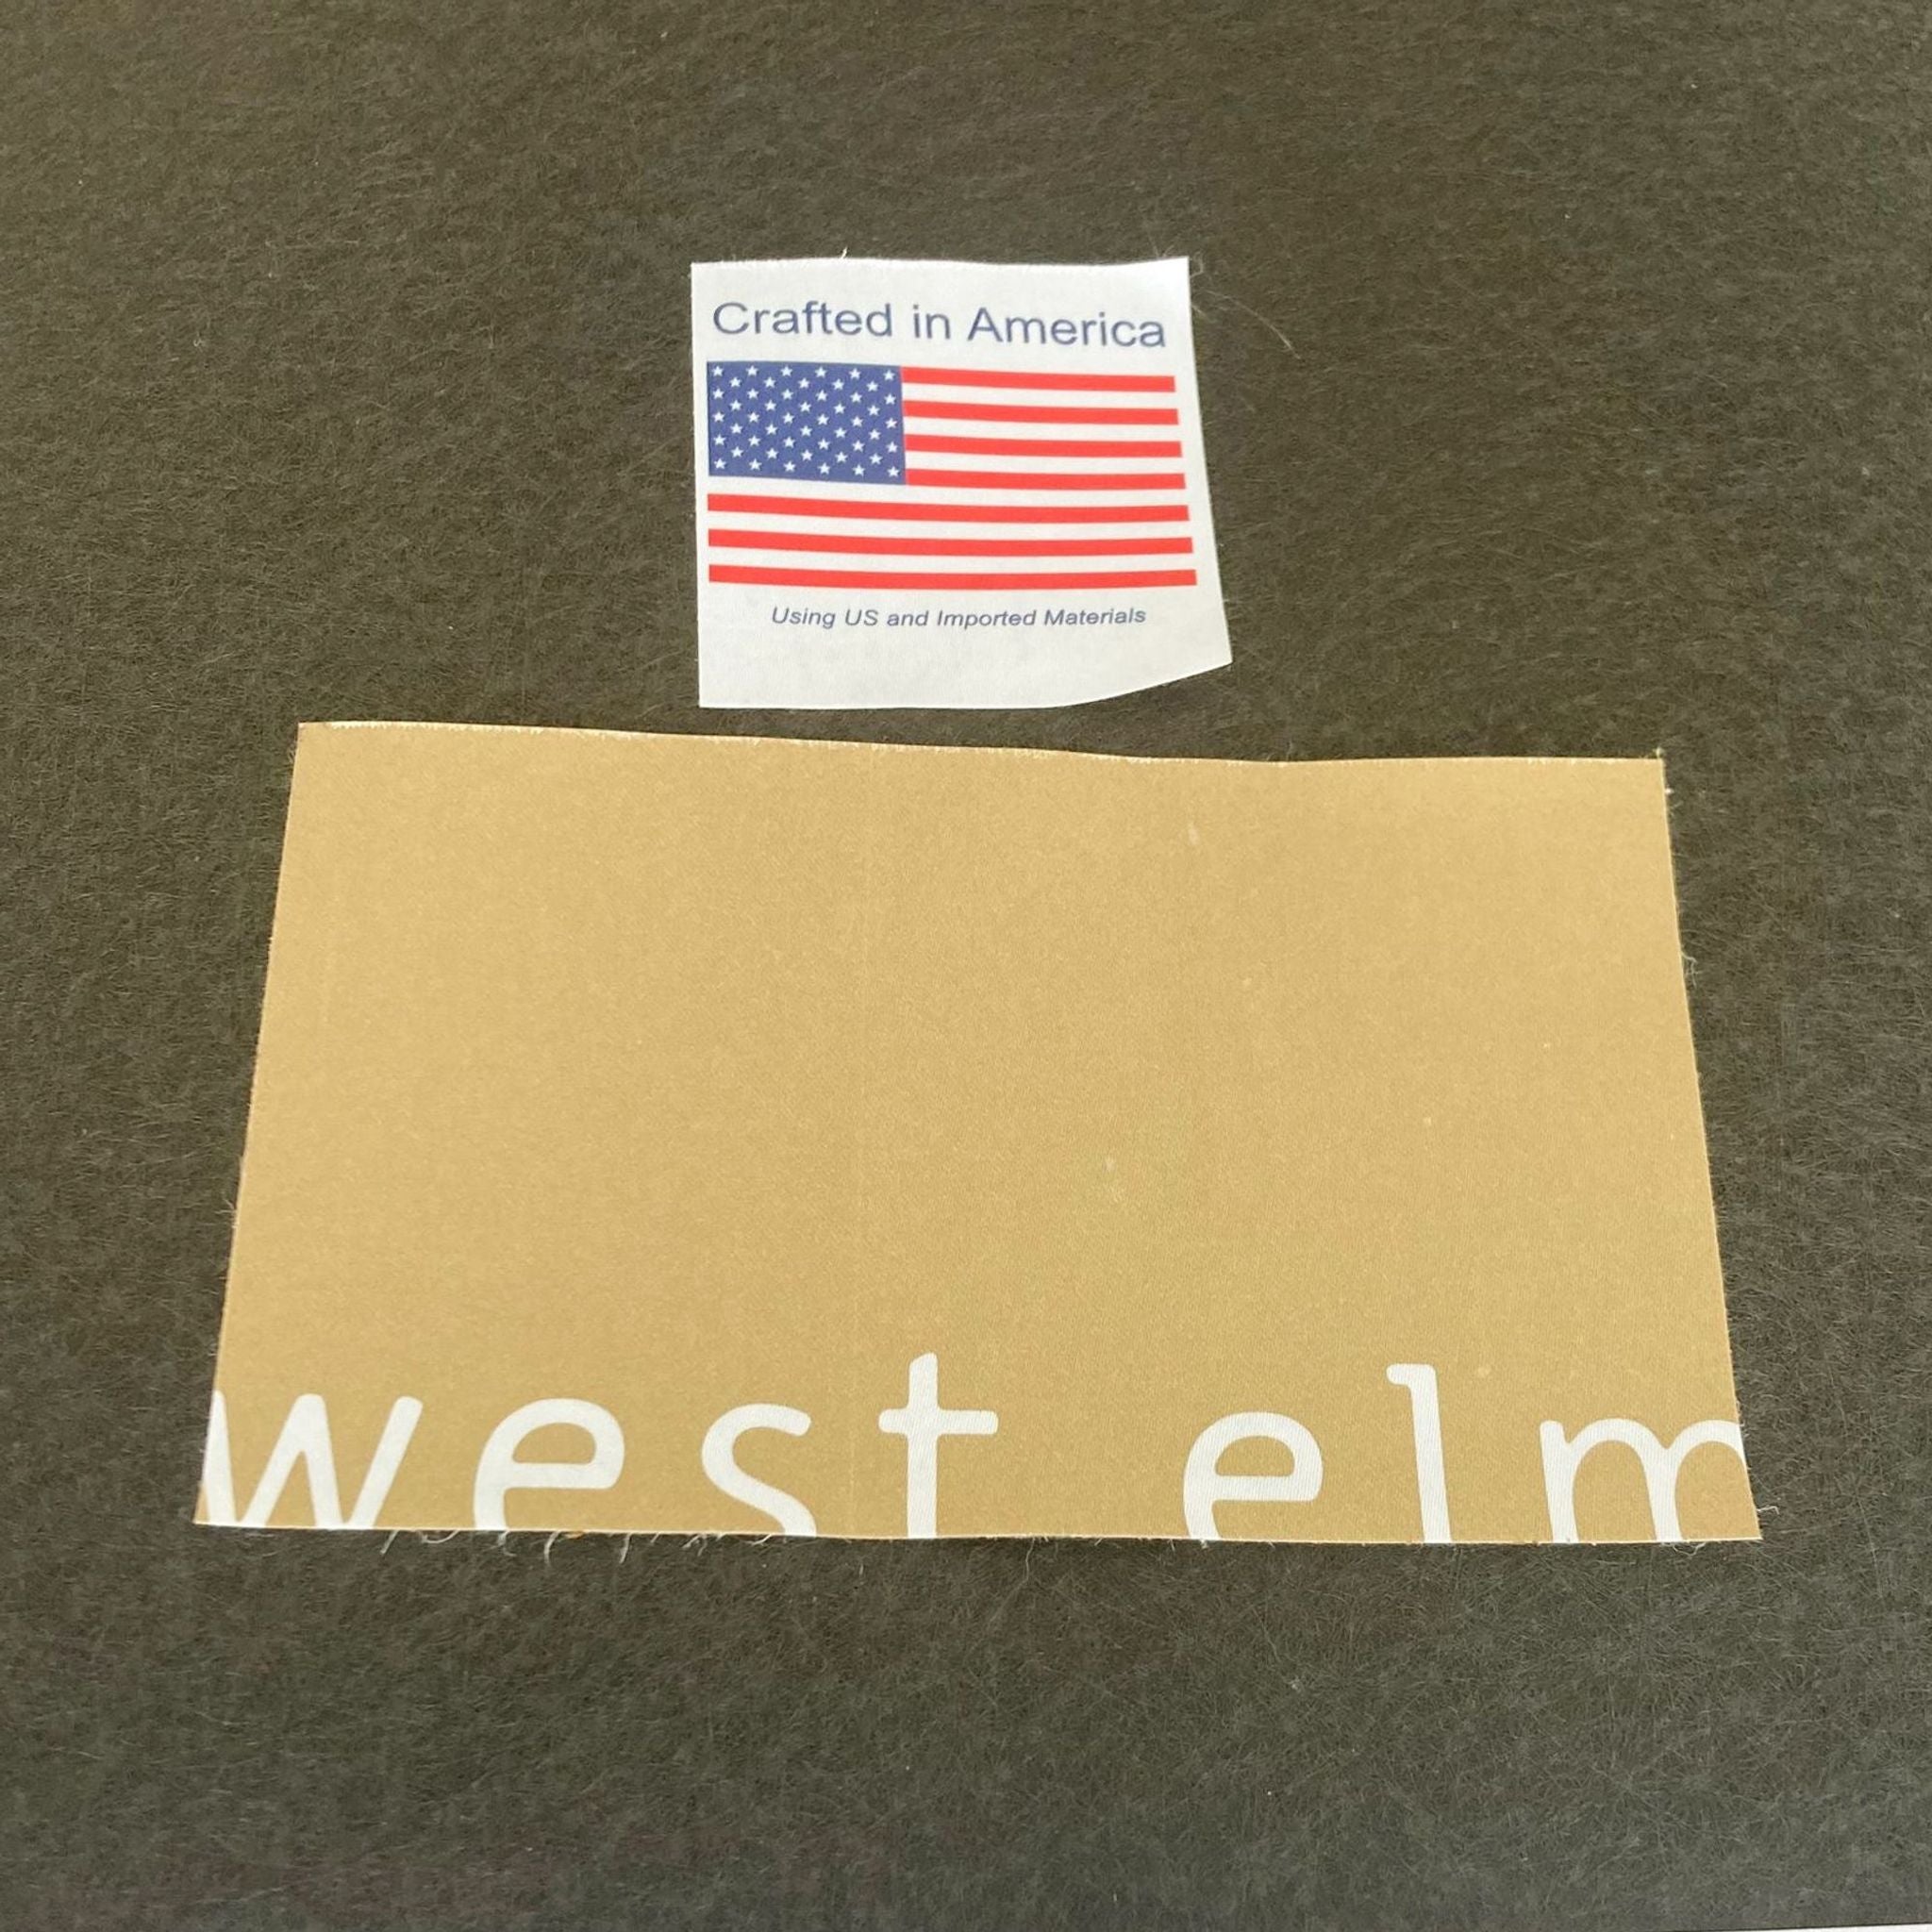 Alt text: West Elm brand label with "Crafted in America" tag on grey fabric, indicating materials used for a modern ottoman.